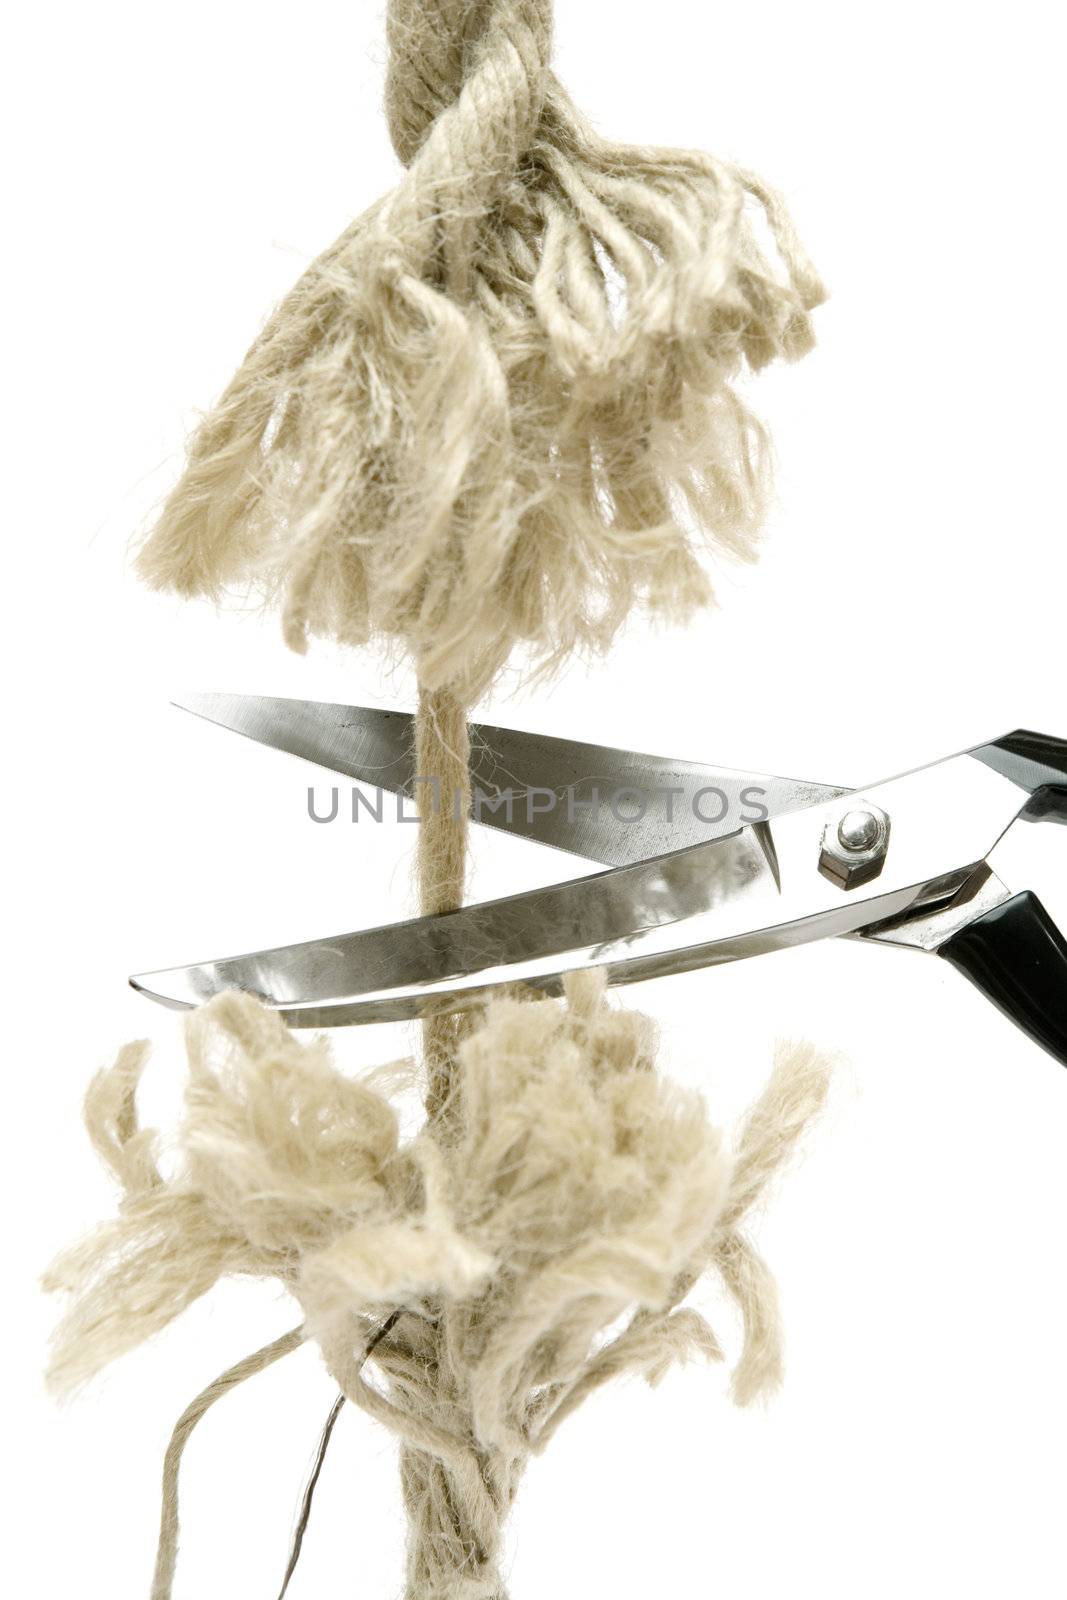 Pair of scissors cutting a piece of rope. Isolated on a white background.